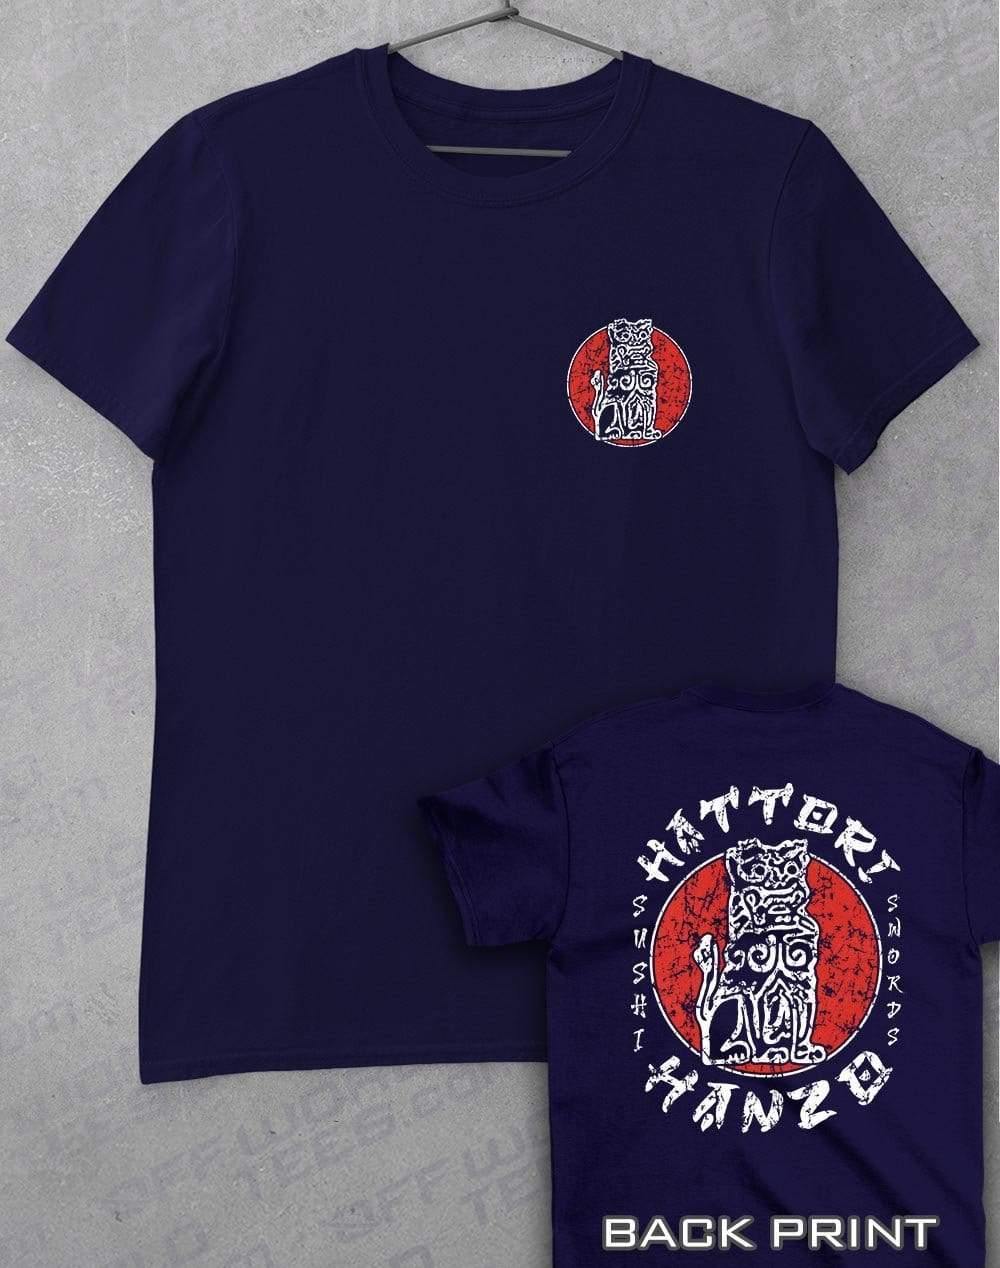 Hattori Hanzo with Back Print T-Shirt S / Navy  - Off World Tees